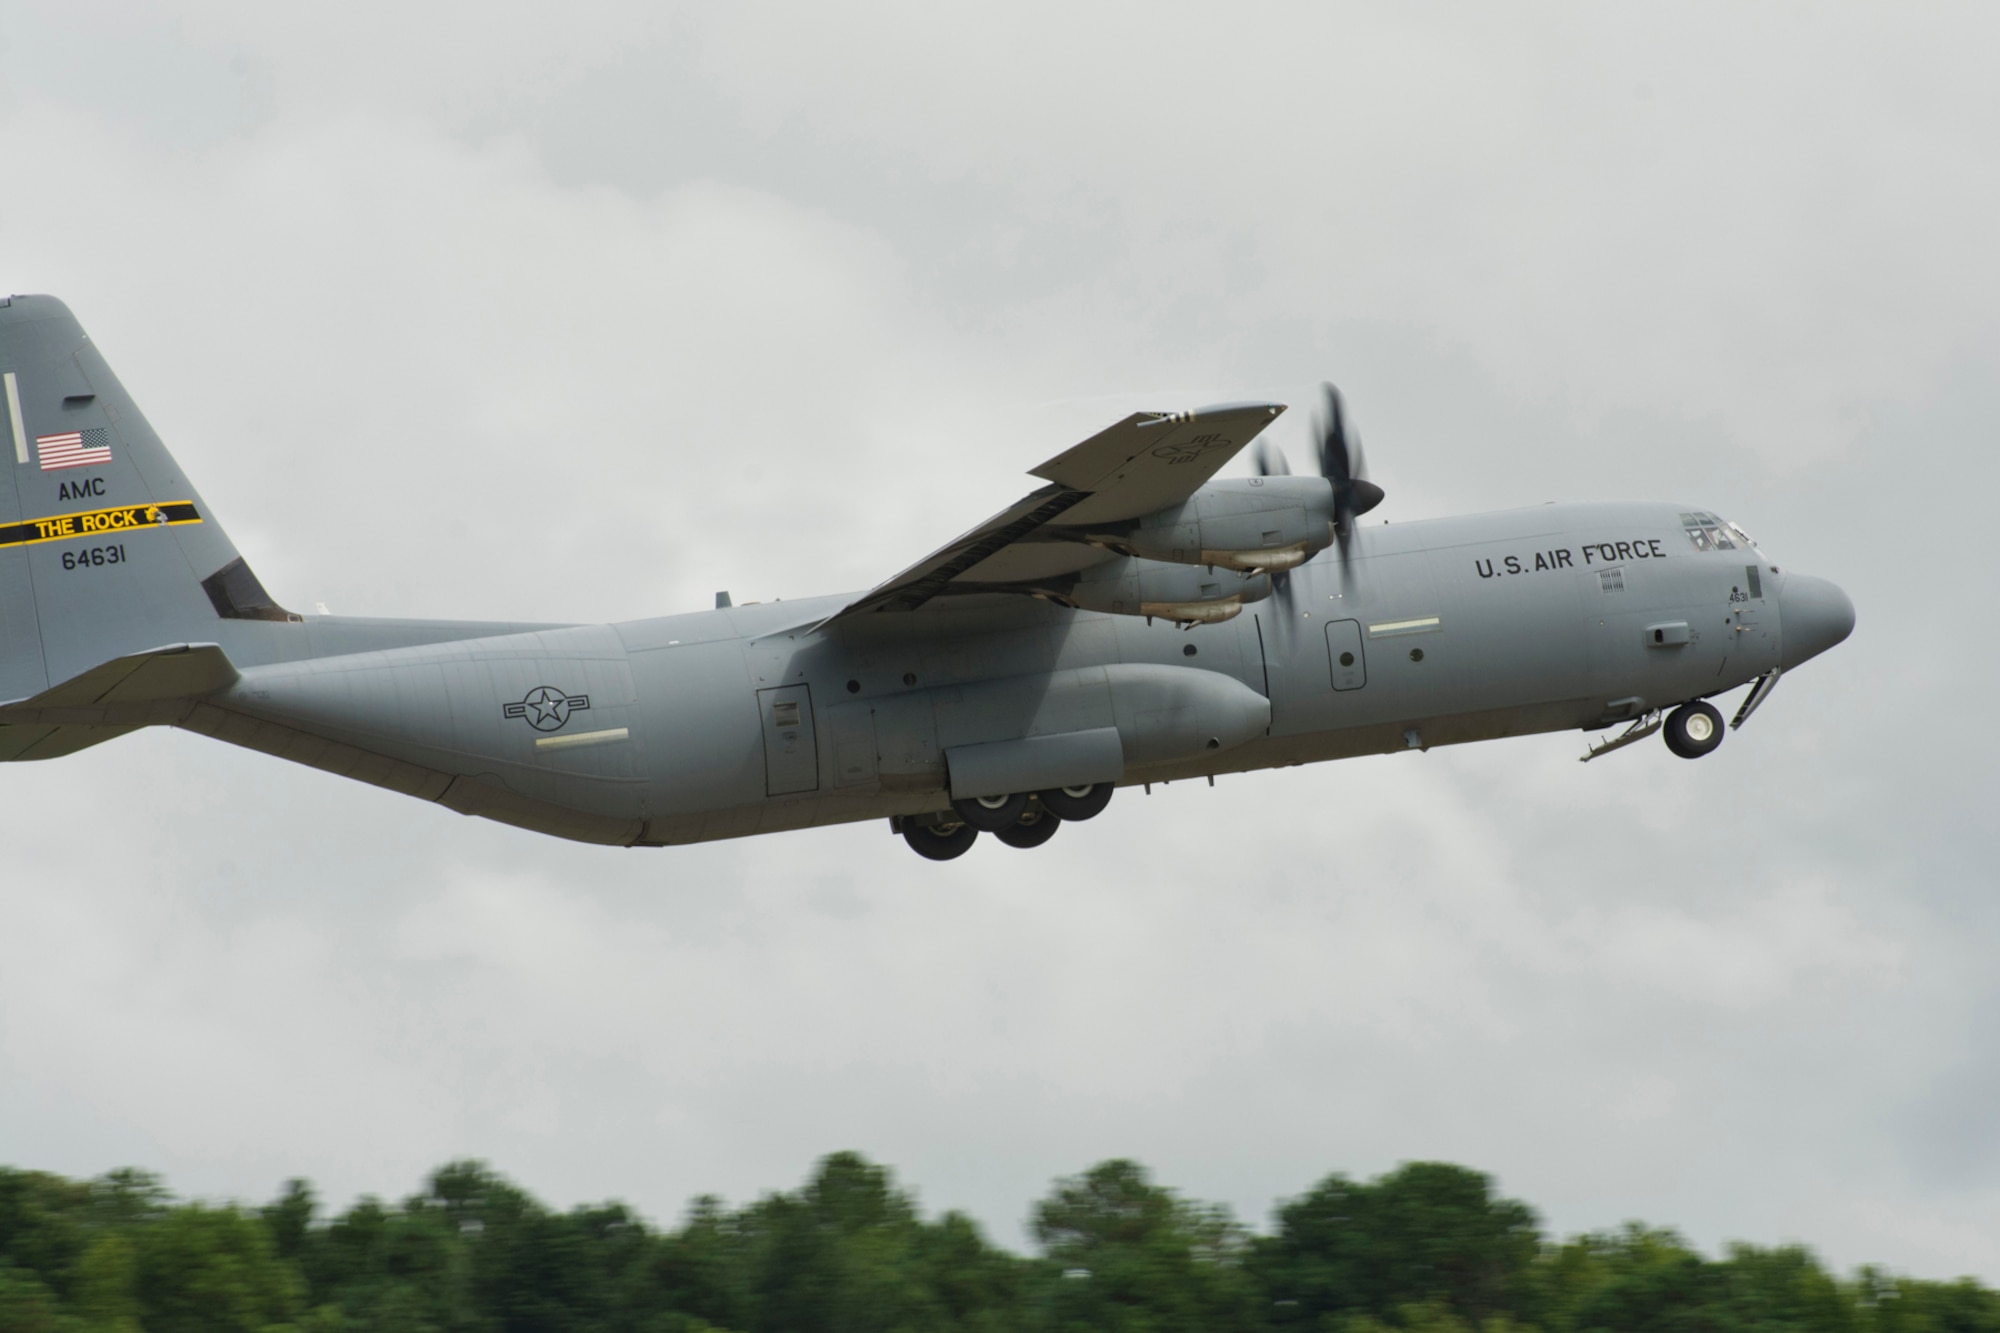 A C-130J takes off at Little Rock Air Force Base, Ark., Aug. 13, 2016. The aircraft and aircrew were part of a two-ship mission during a Unit Assembly Training weekend, which was the first time since the 913th Airlift Group transitioned from the “H” to the “J” model. (U.S. Air Force photo by Master Sgt. Jeff Walston)